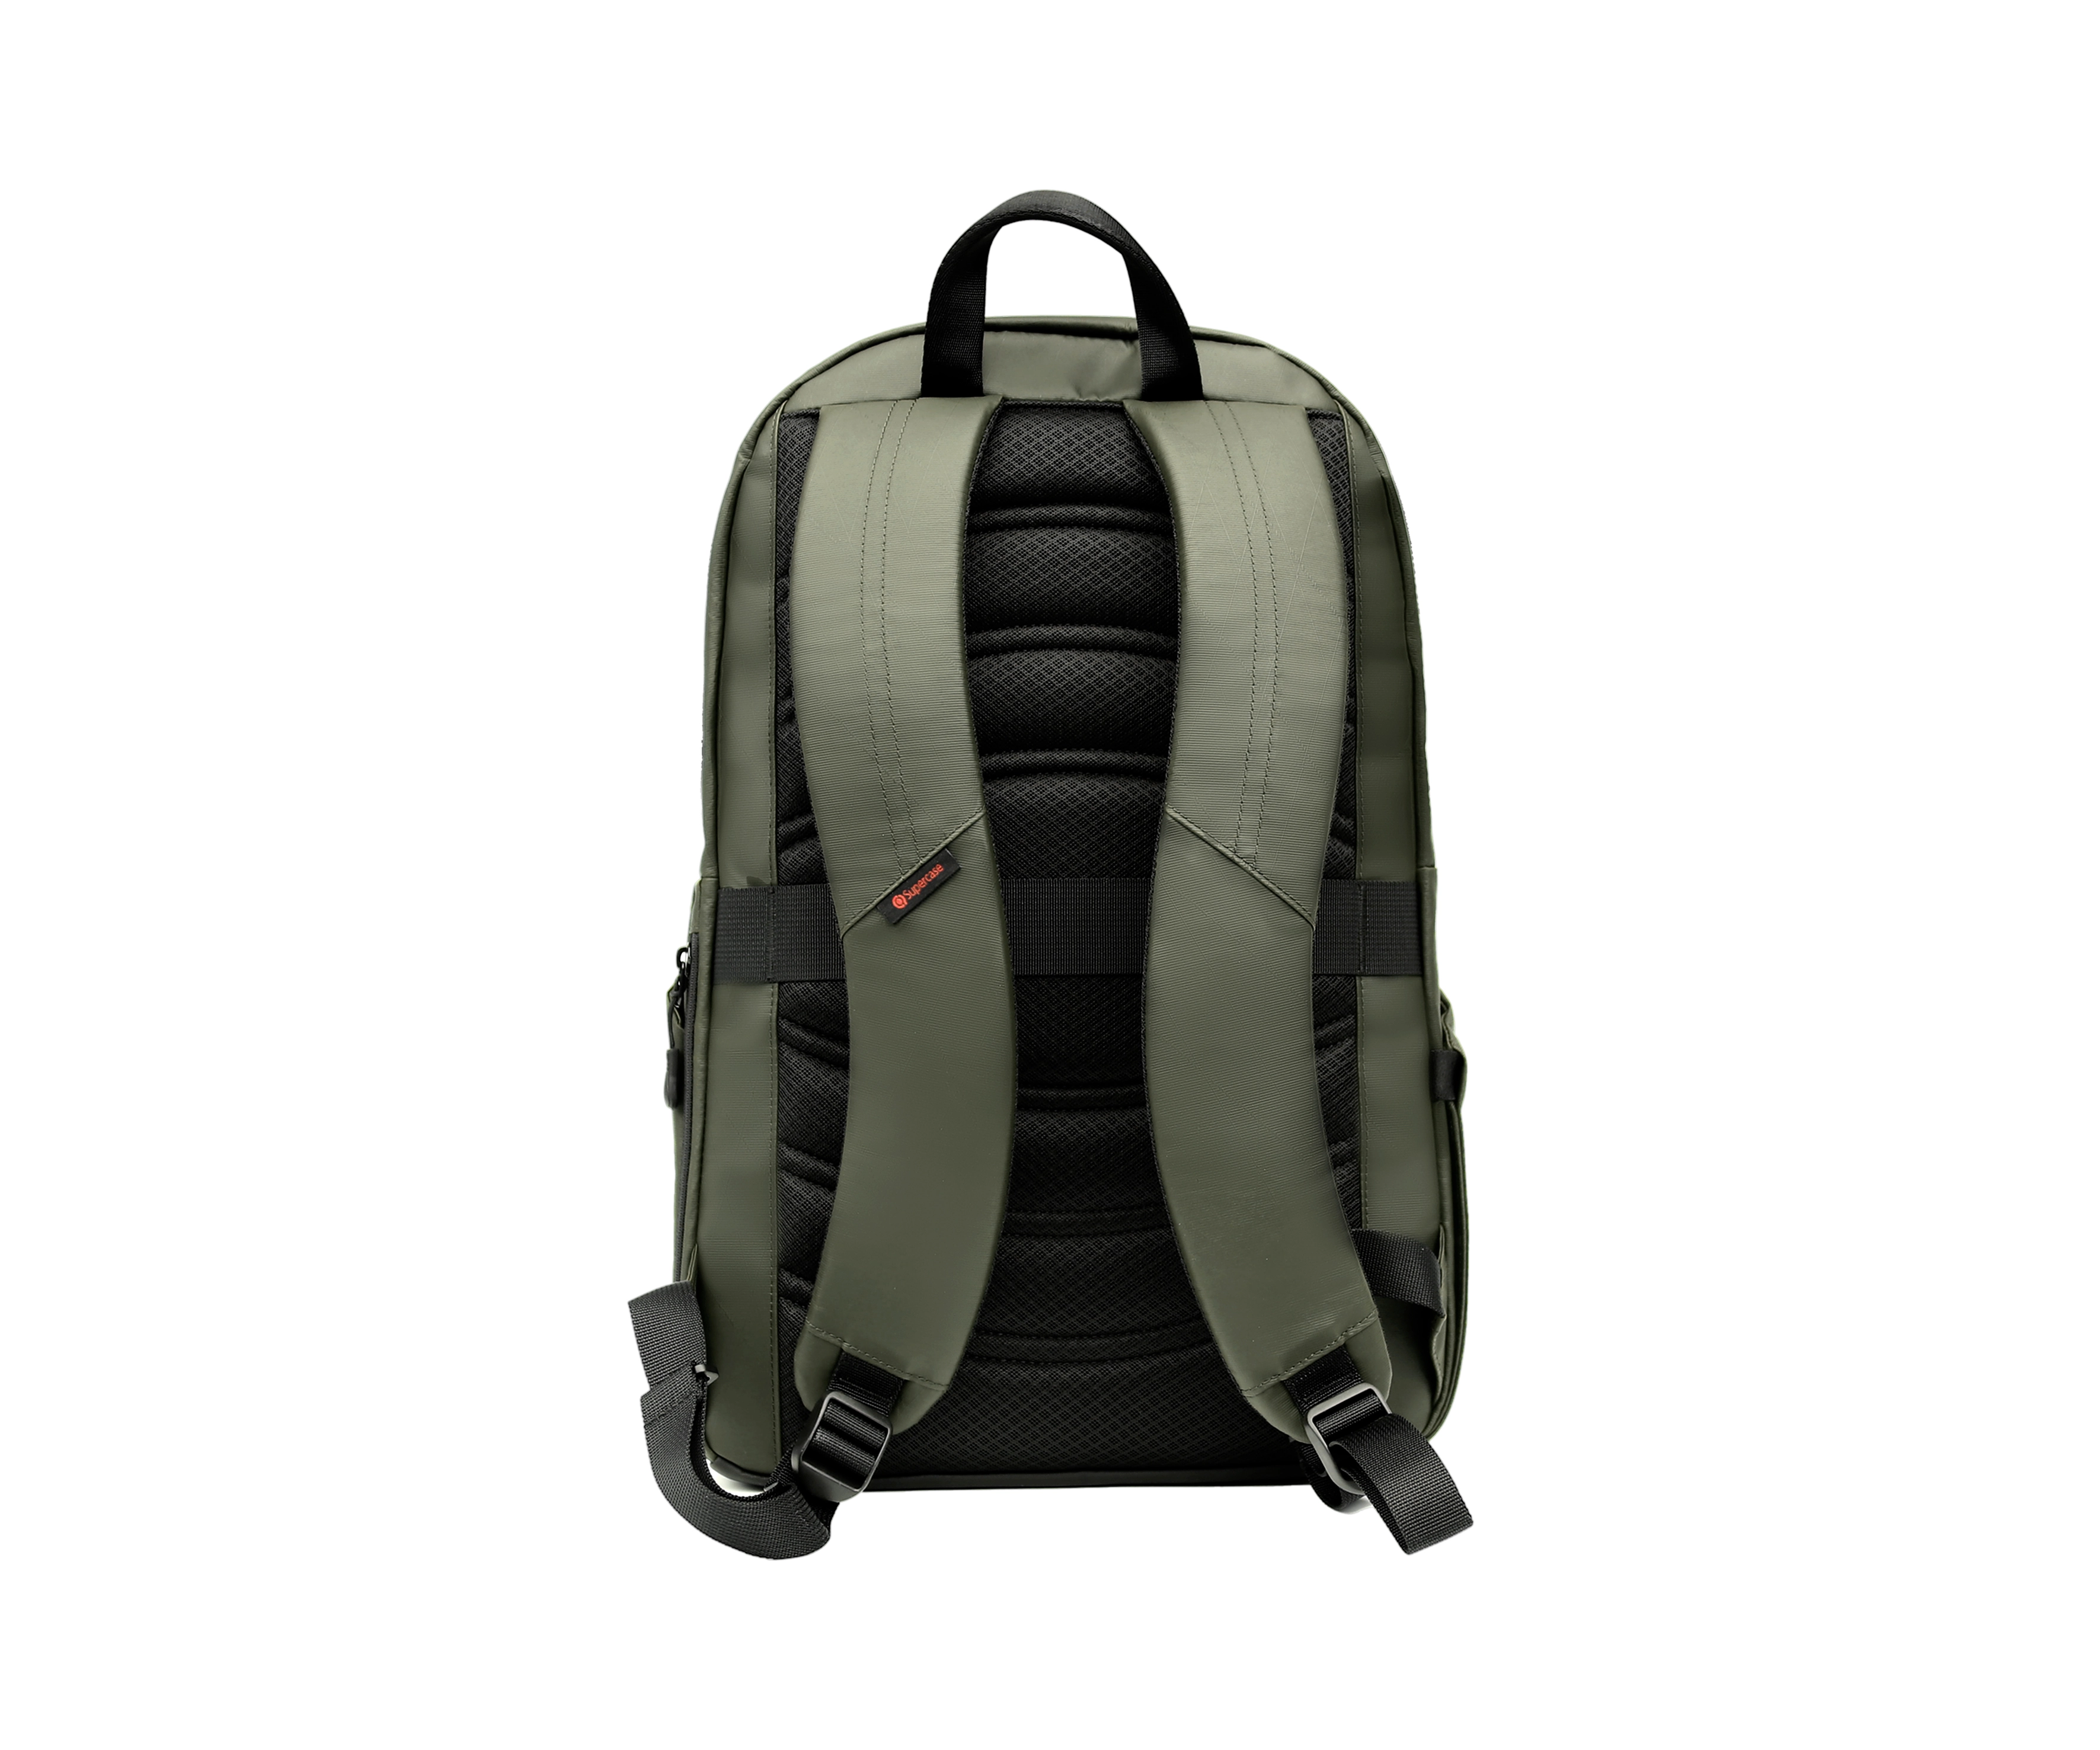 Customizing Your Backpack for Your Customers's Needs